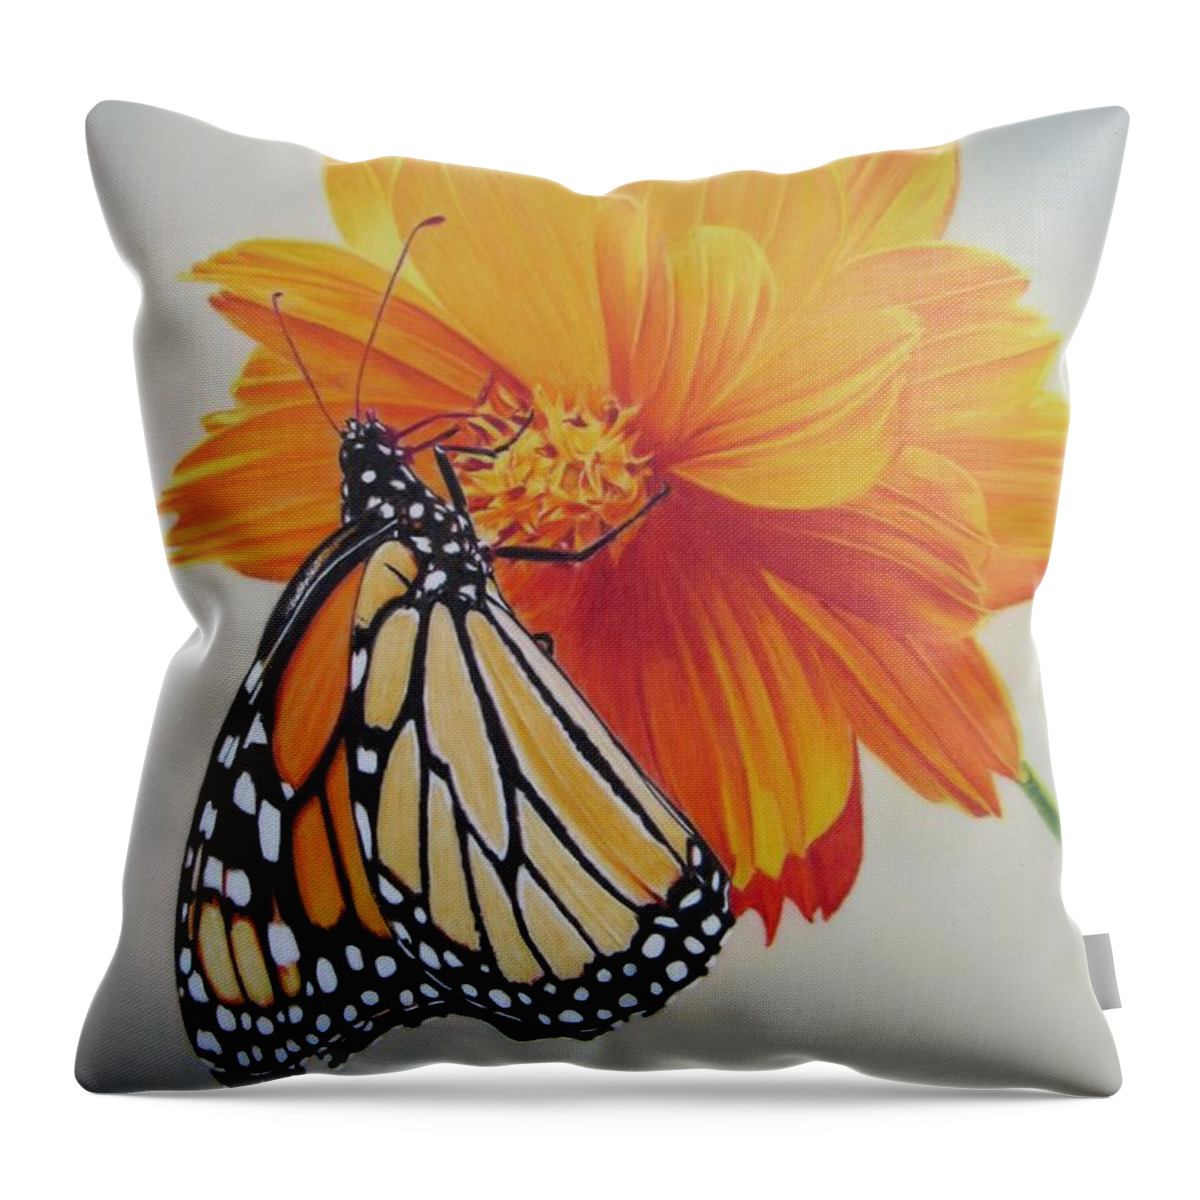 Monarch Throw Pillow featuring the drawing Climb Every Flower by Kelly Speros